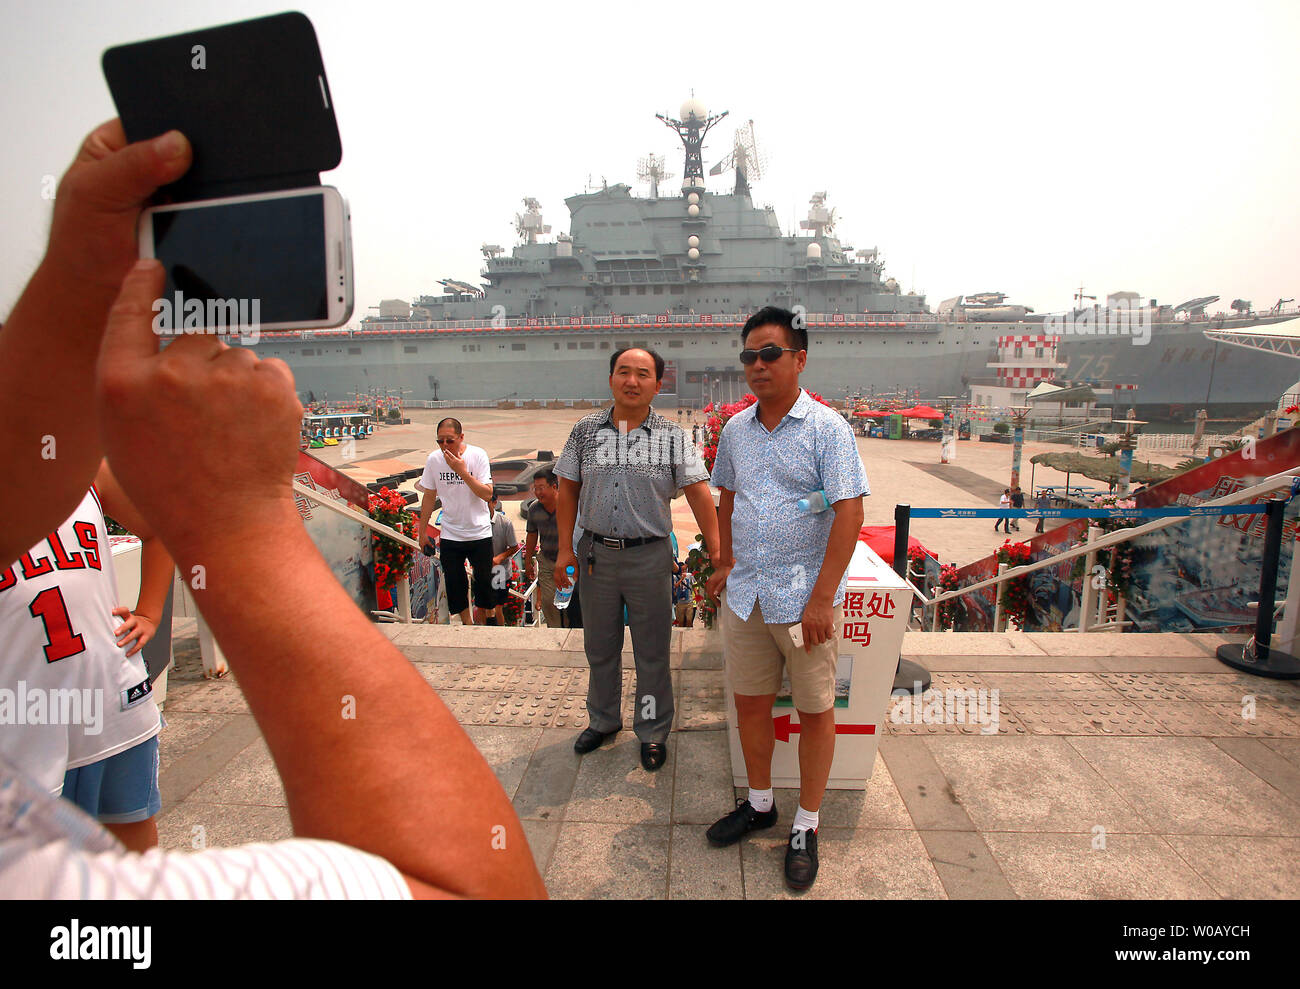 Chinese tourists visit the Binhai Aircraft Carrier Theme Park, featuring the ex-Russian heavy aircraft cruiser the Kiev, in Tianjin on July 29, 2014.  The Kiev was a heavy aircraft-carrying cruiser that served the Soviet and Russian navies from 1975 to 1993 before being sold to a Chinese company in 1996 for use in a military theme park.  Over $15.5 million was spent restoring and outfitting the ex-warship into a luxury hotel developed by tourism and attraction consultant Leisure Quest International (USA).      UPI/Stephen Shaver Stock Photo